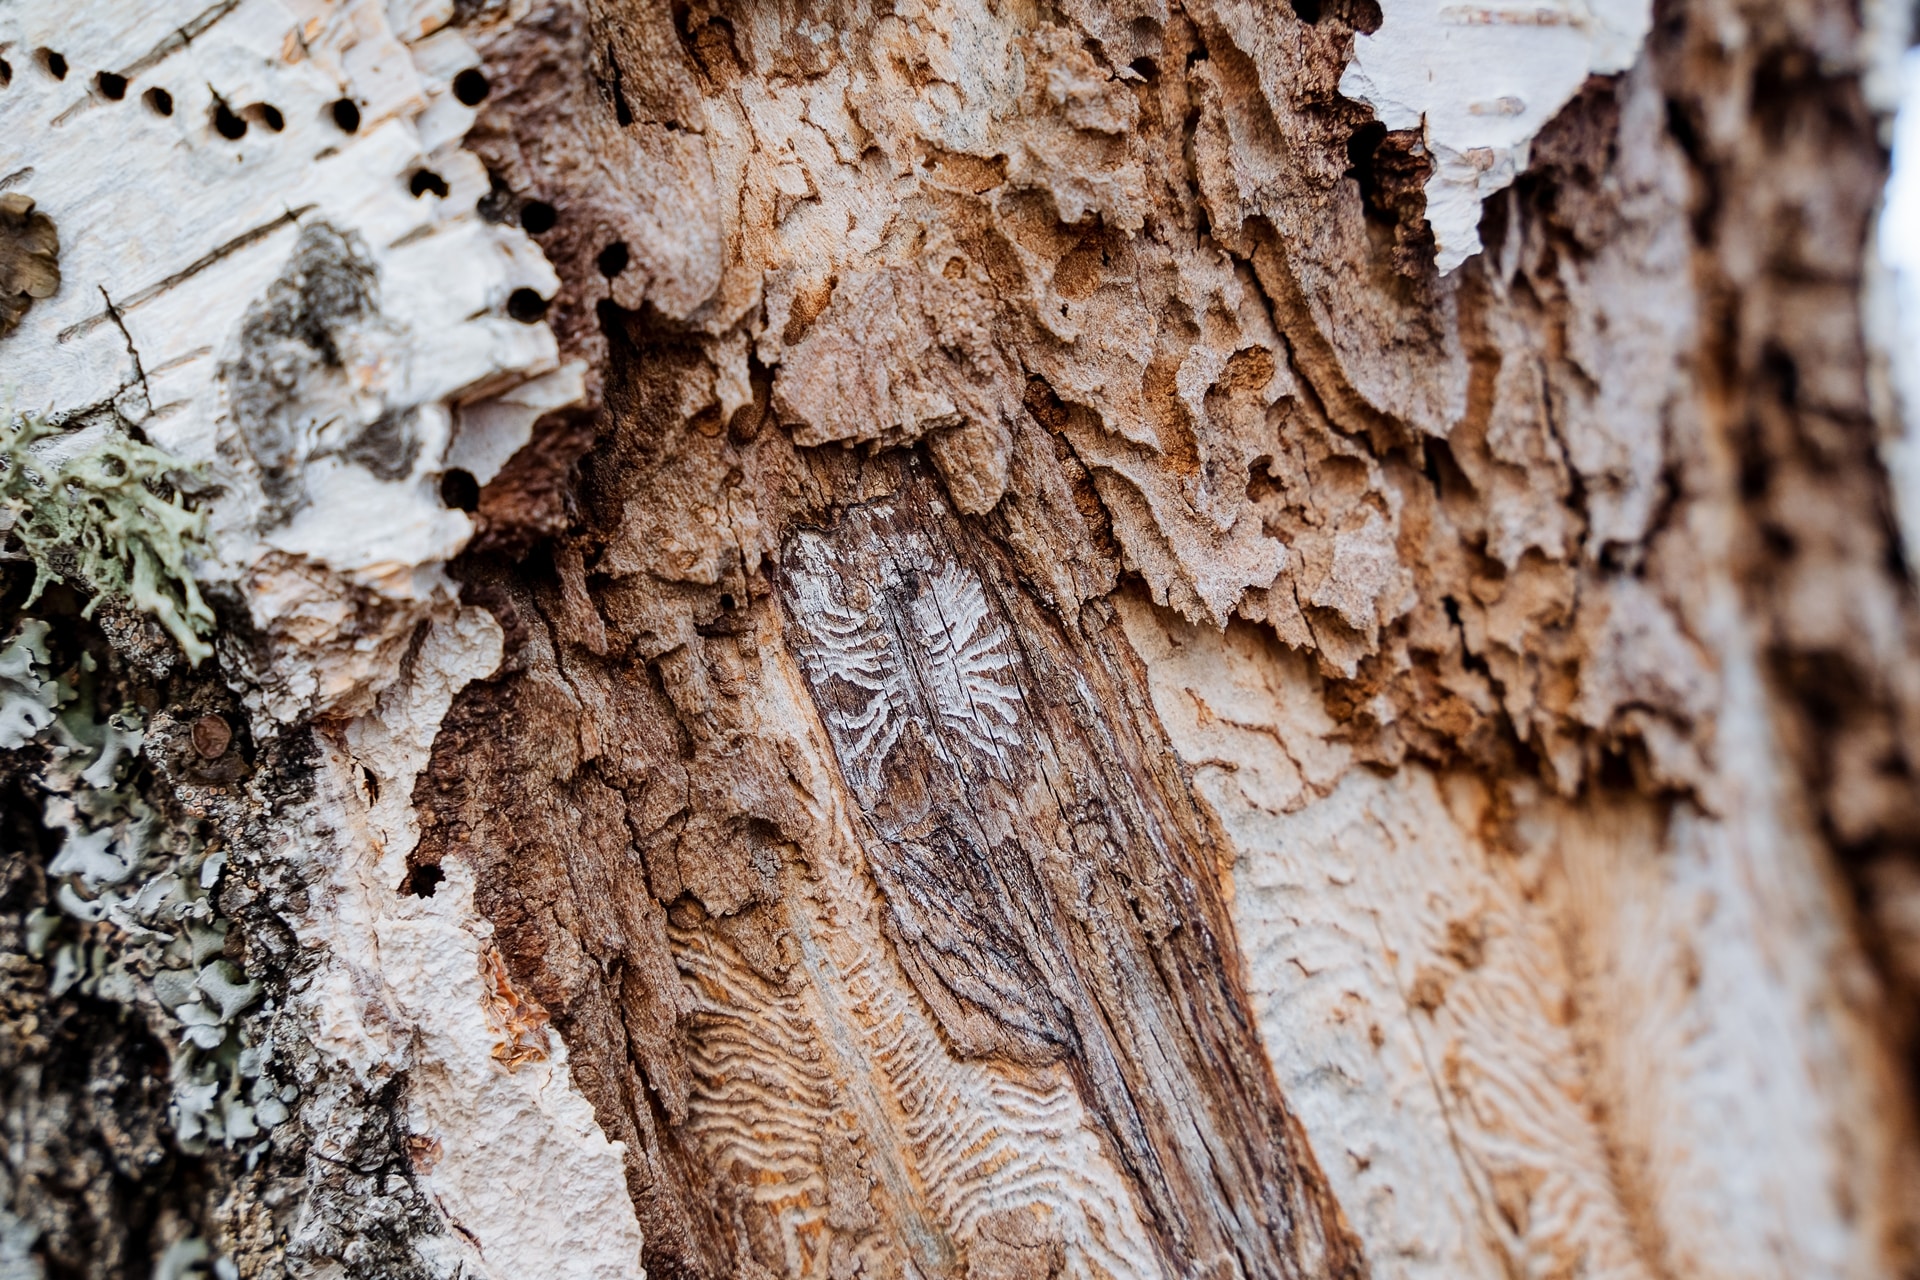 A close-up of a birch tree damaged by bark beetles.